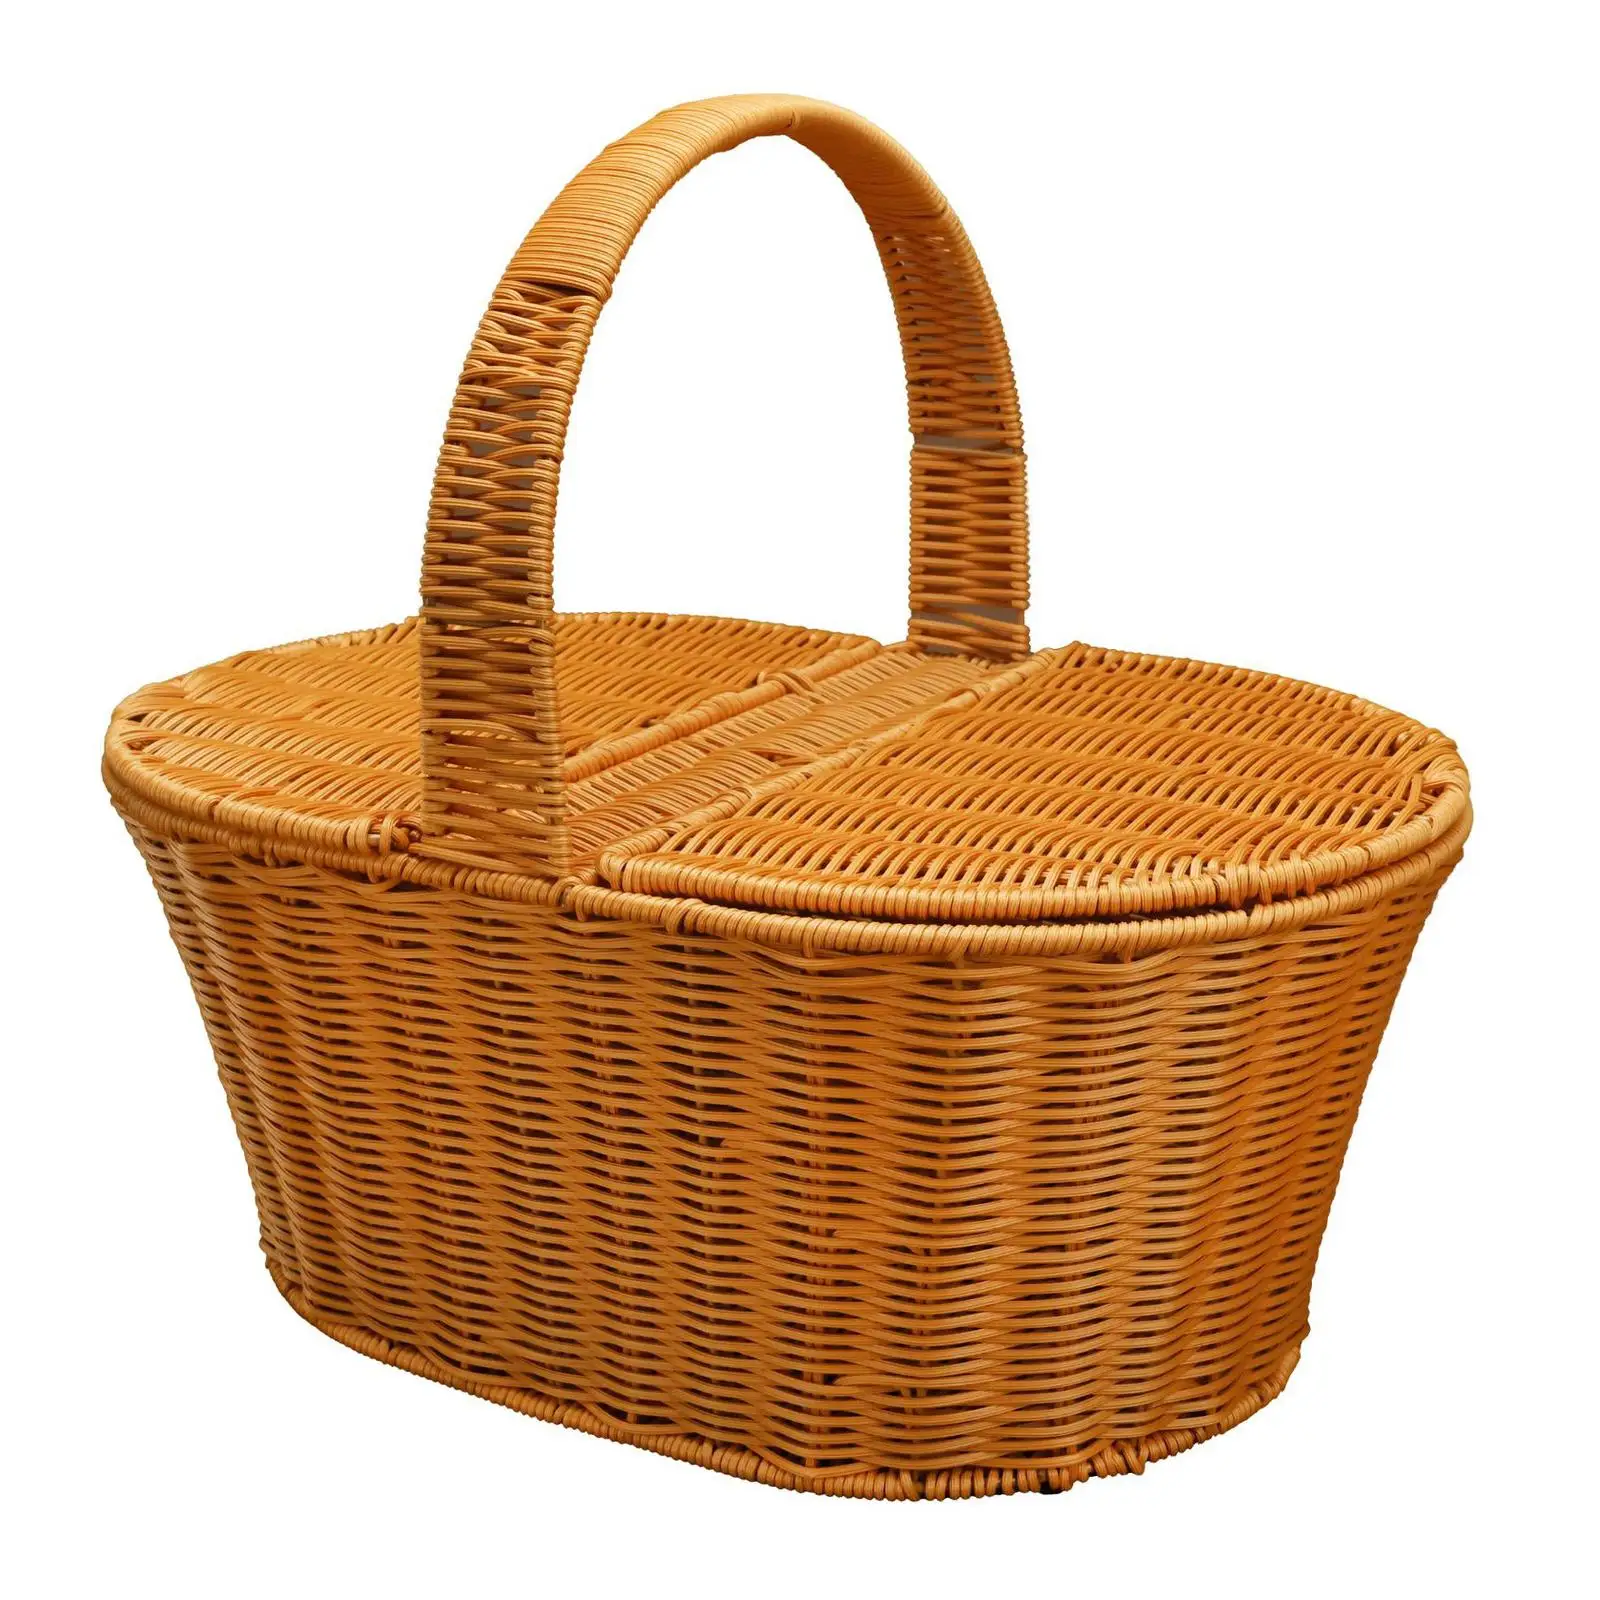 Hand Woven Basket Containers Nesting Basket Bin Fruits Storage Baskets Organizer for Picnic Shopping Pantry Cabinet Bathroom